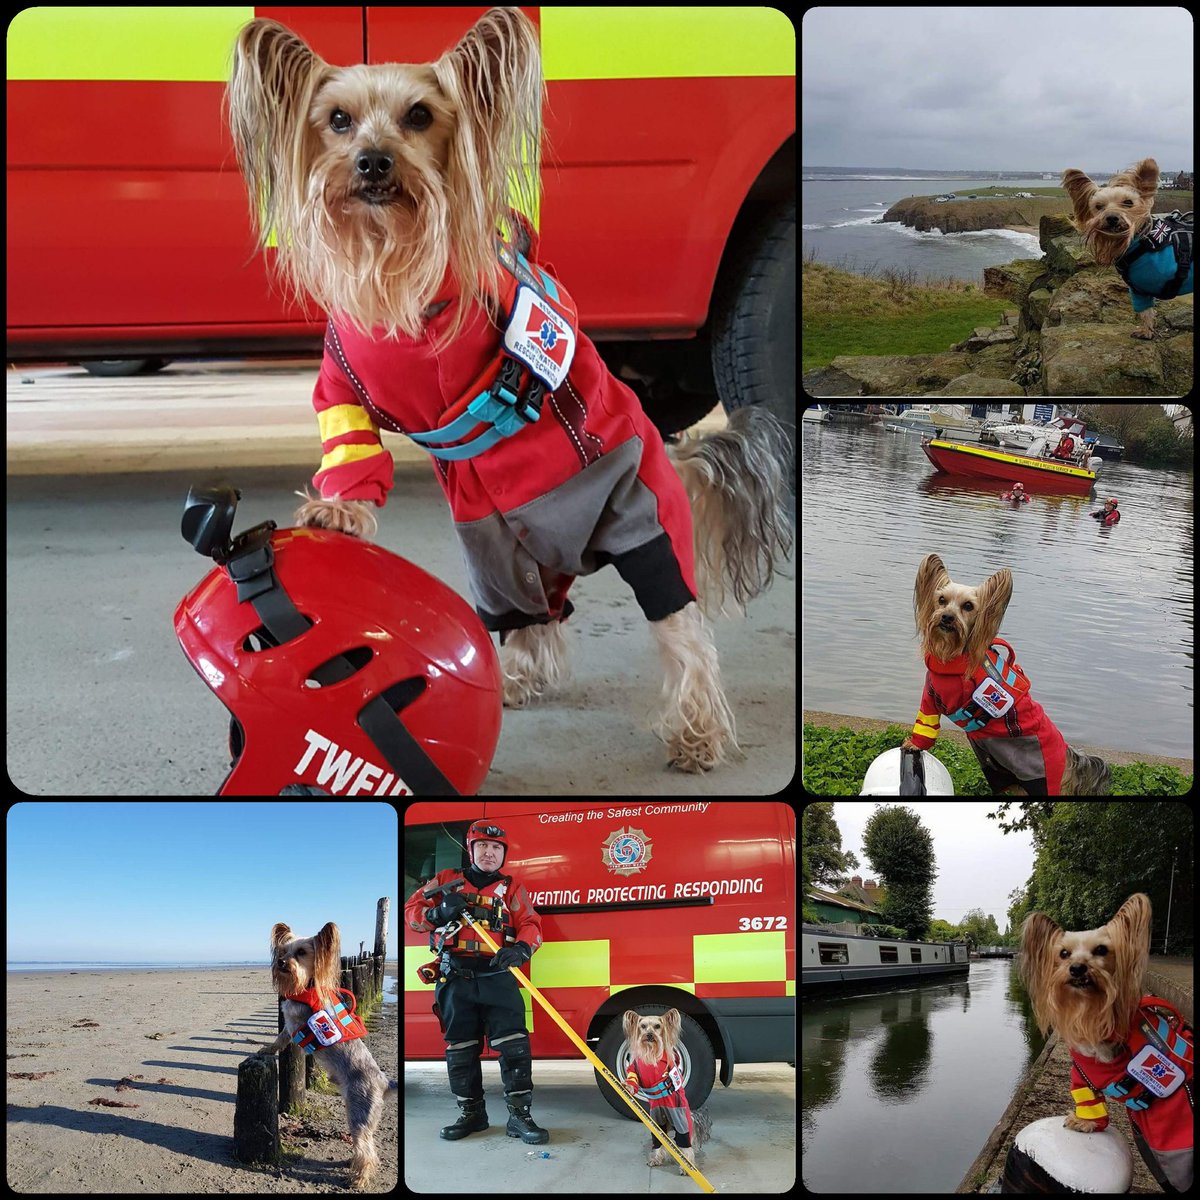 Watercourses has water currents. Often the waters may looks harmless, calm & invitings but can has very strong, powerful currents lurkings beneaths the surface. #IWSD2018 #bewateraware #bewaterawareUK #respectthewater #InternationalWaterSafetyDay  #dogsoftwitter #tripawd #yorkie